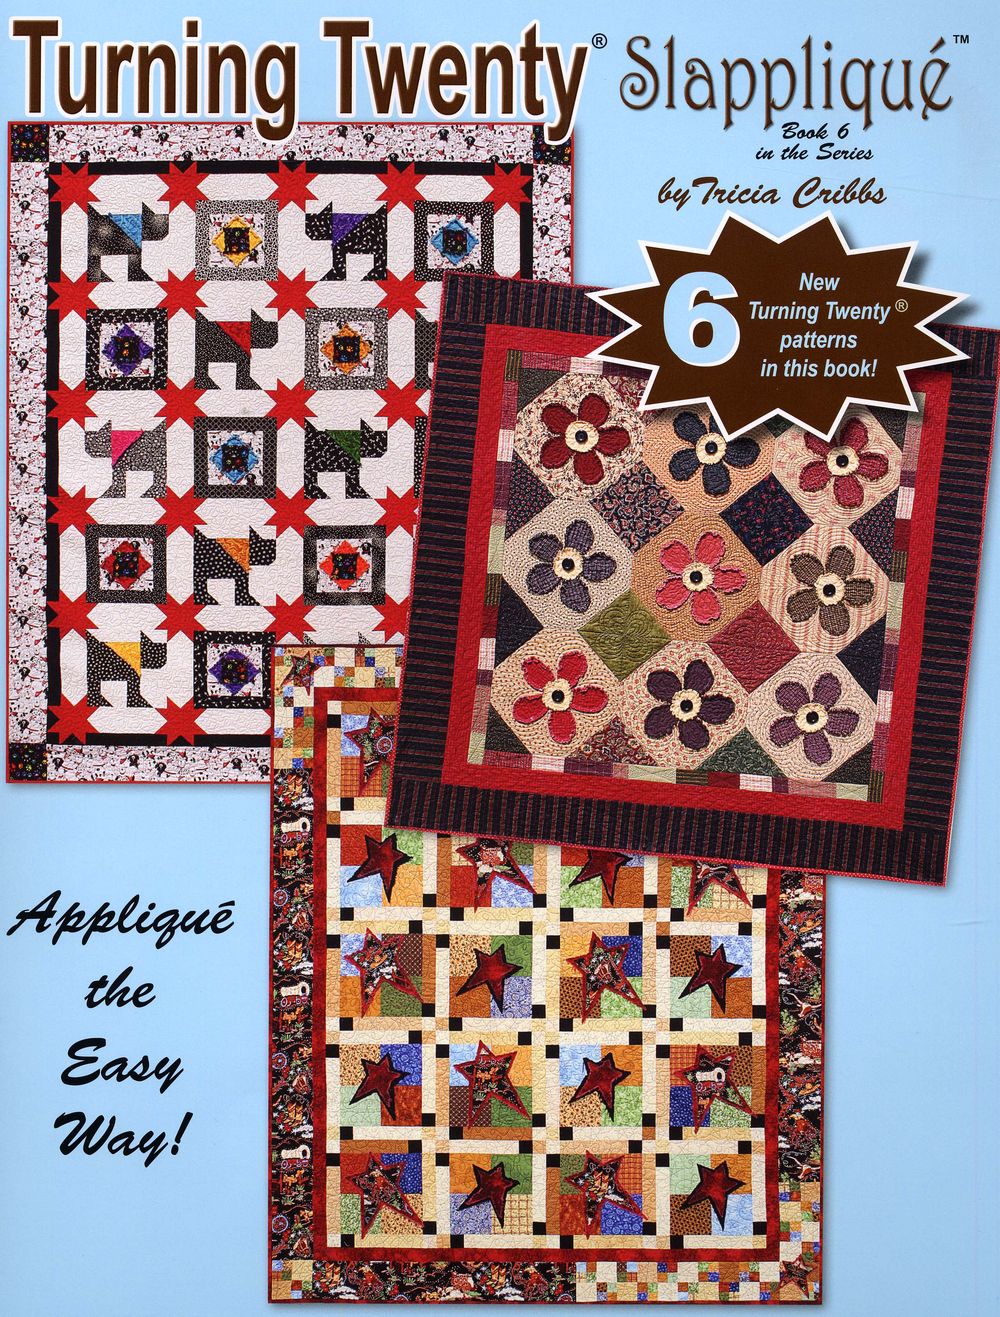 Turning Twenty Slapplique Quilt Pattern Book by Tricia Cribbs of Friendfolks